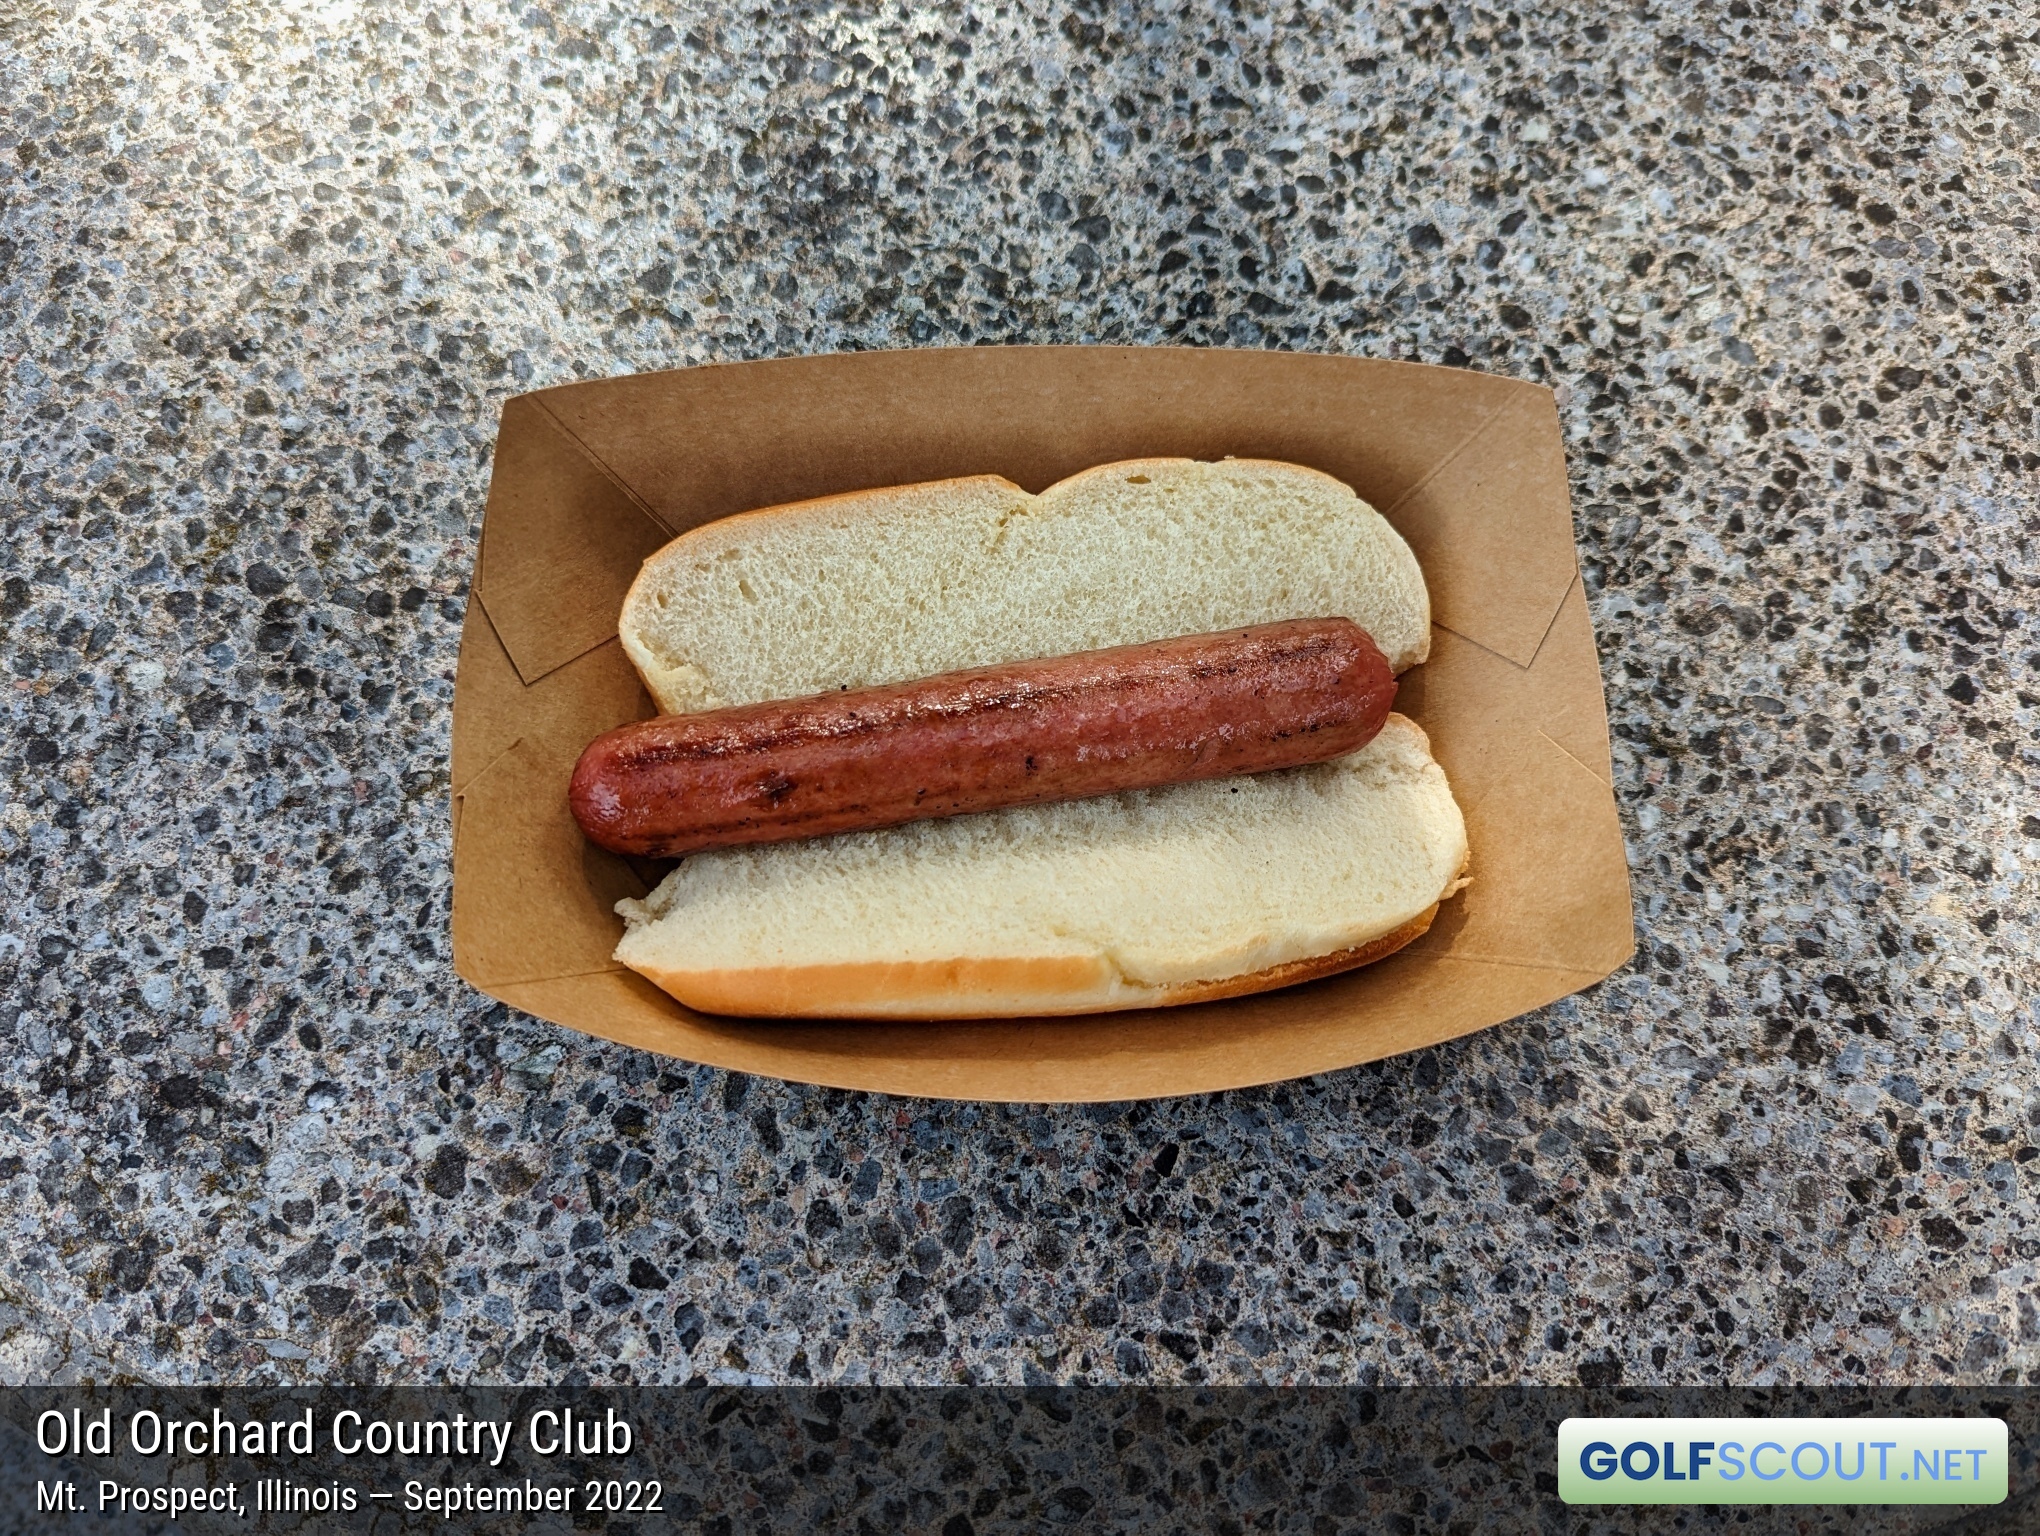 Photo of the food and dining at Old Orchard Country Club in Mt. Prospect, Illinois. Photo of the hot dog at Old Orchard Country Club in Mt. Prospect, Illinois.